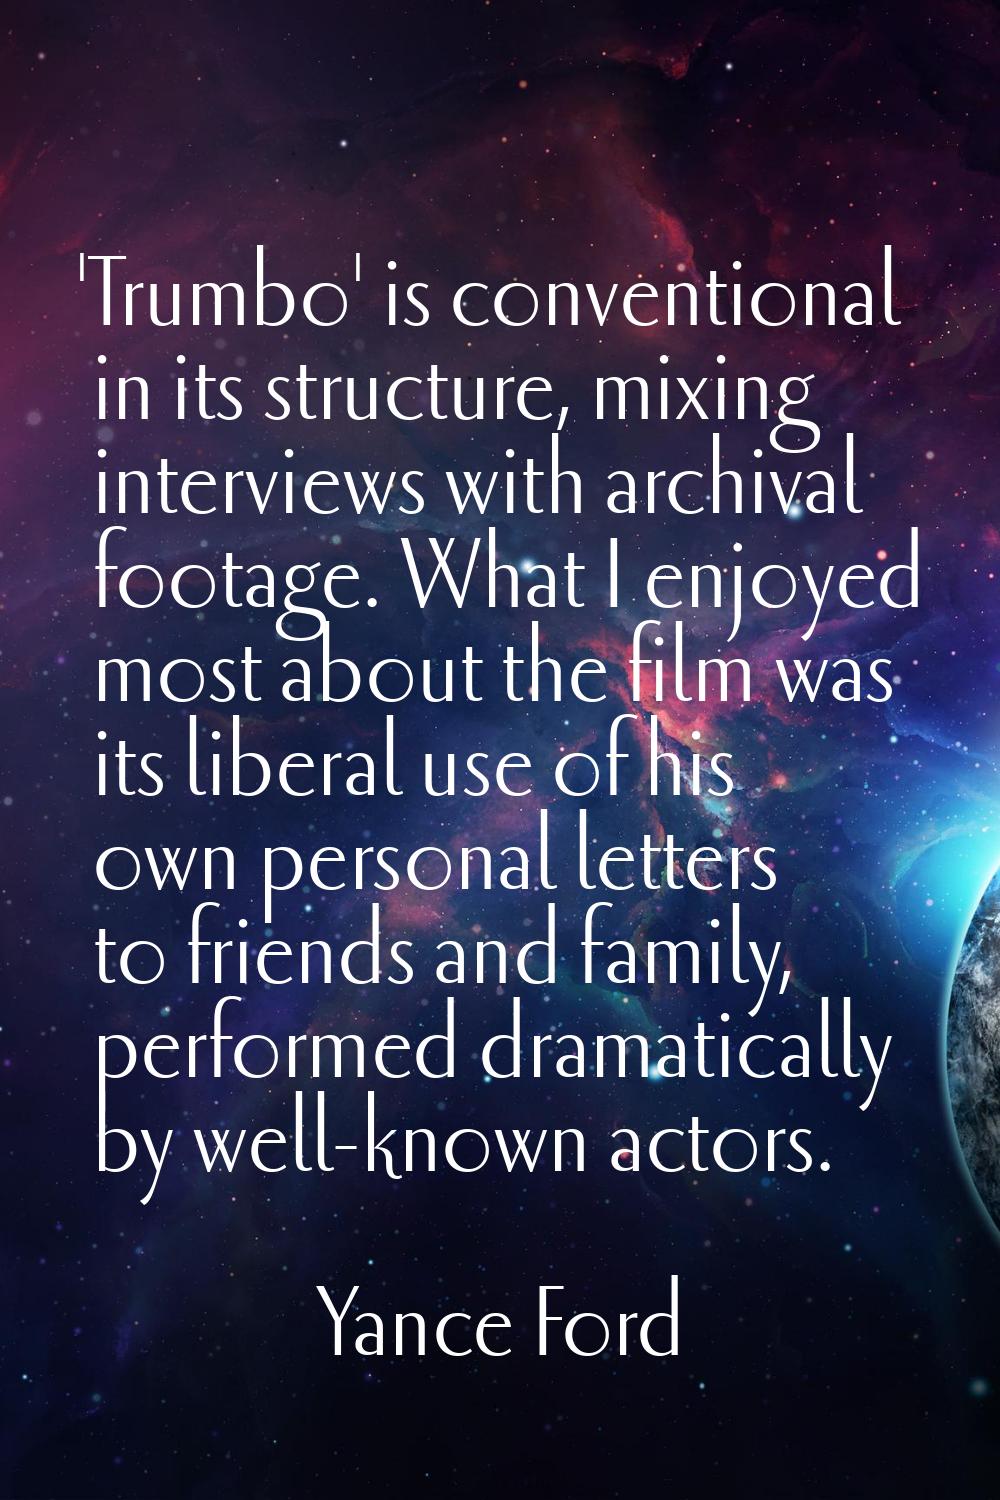 'Trumbo' is conventional in its structure, mixing interviews with archival footage. What I enjoyed 